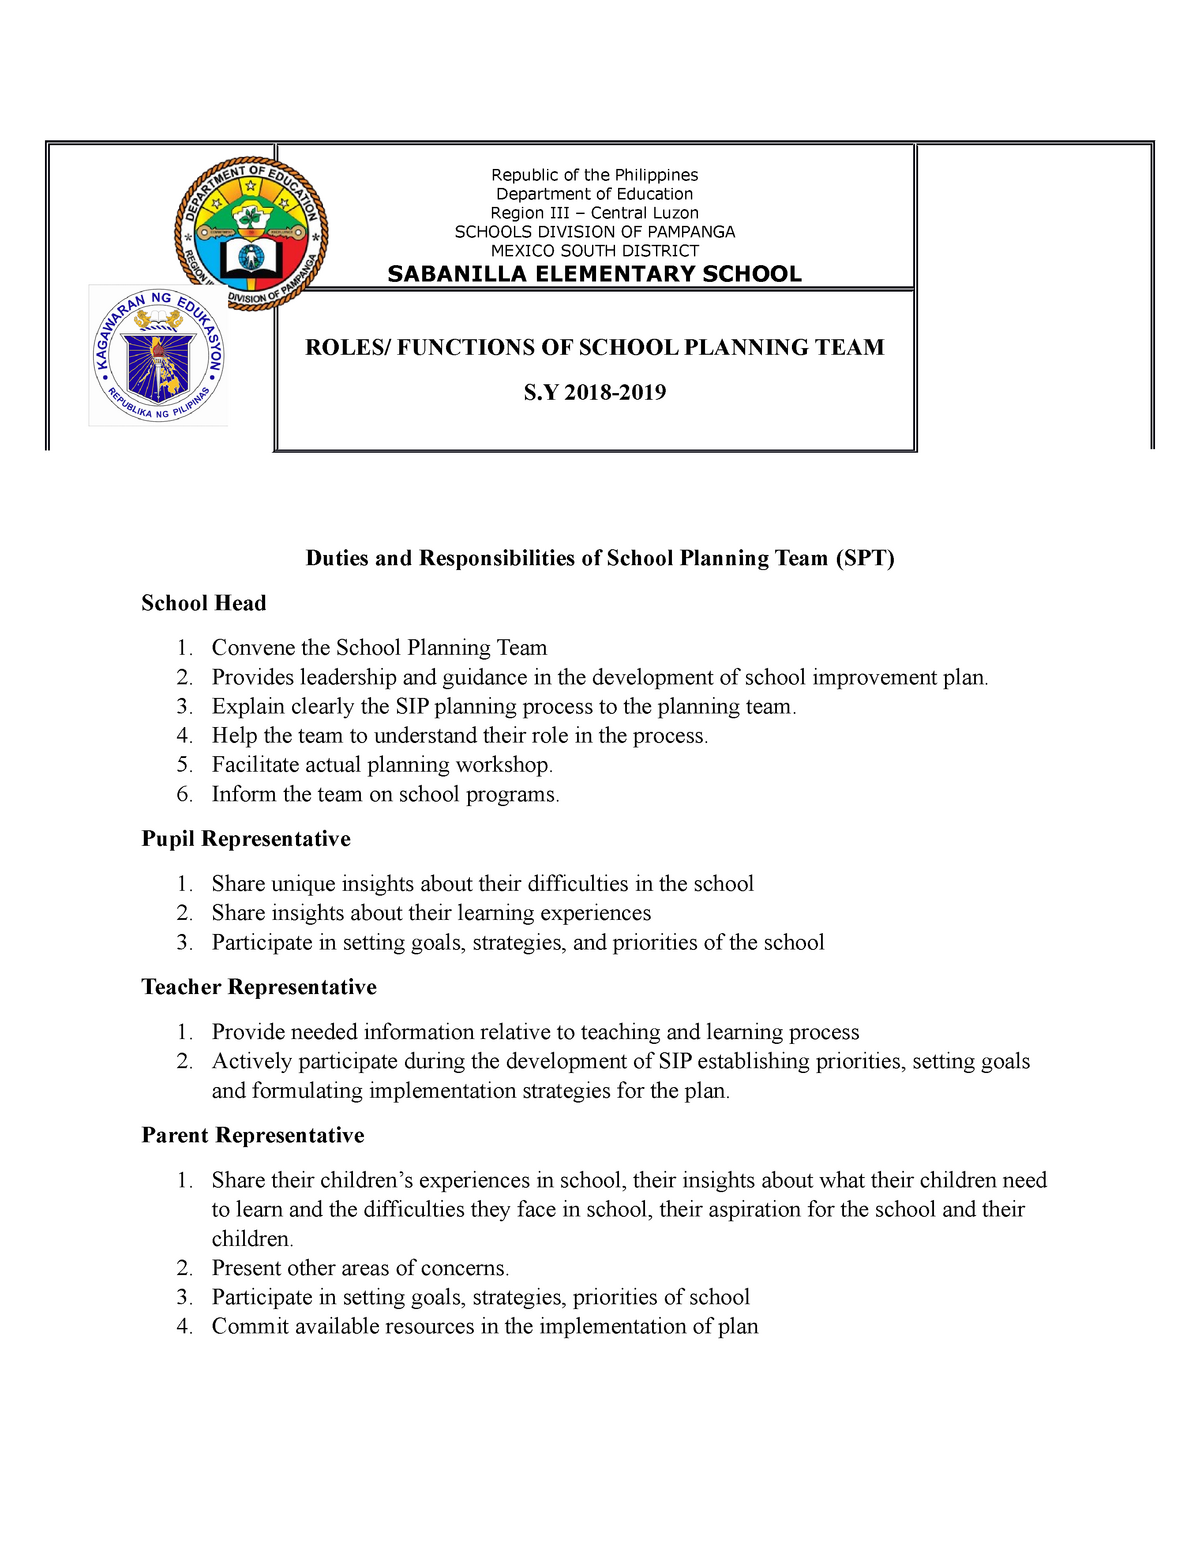 Roles And Function Spt 2018-2019 - Republic Of The Philippines Department  Of Education Region Iii – - Studocu